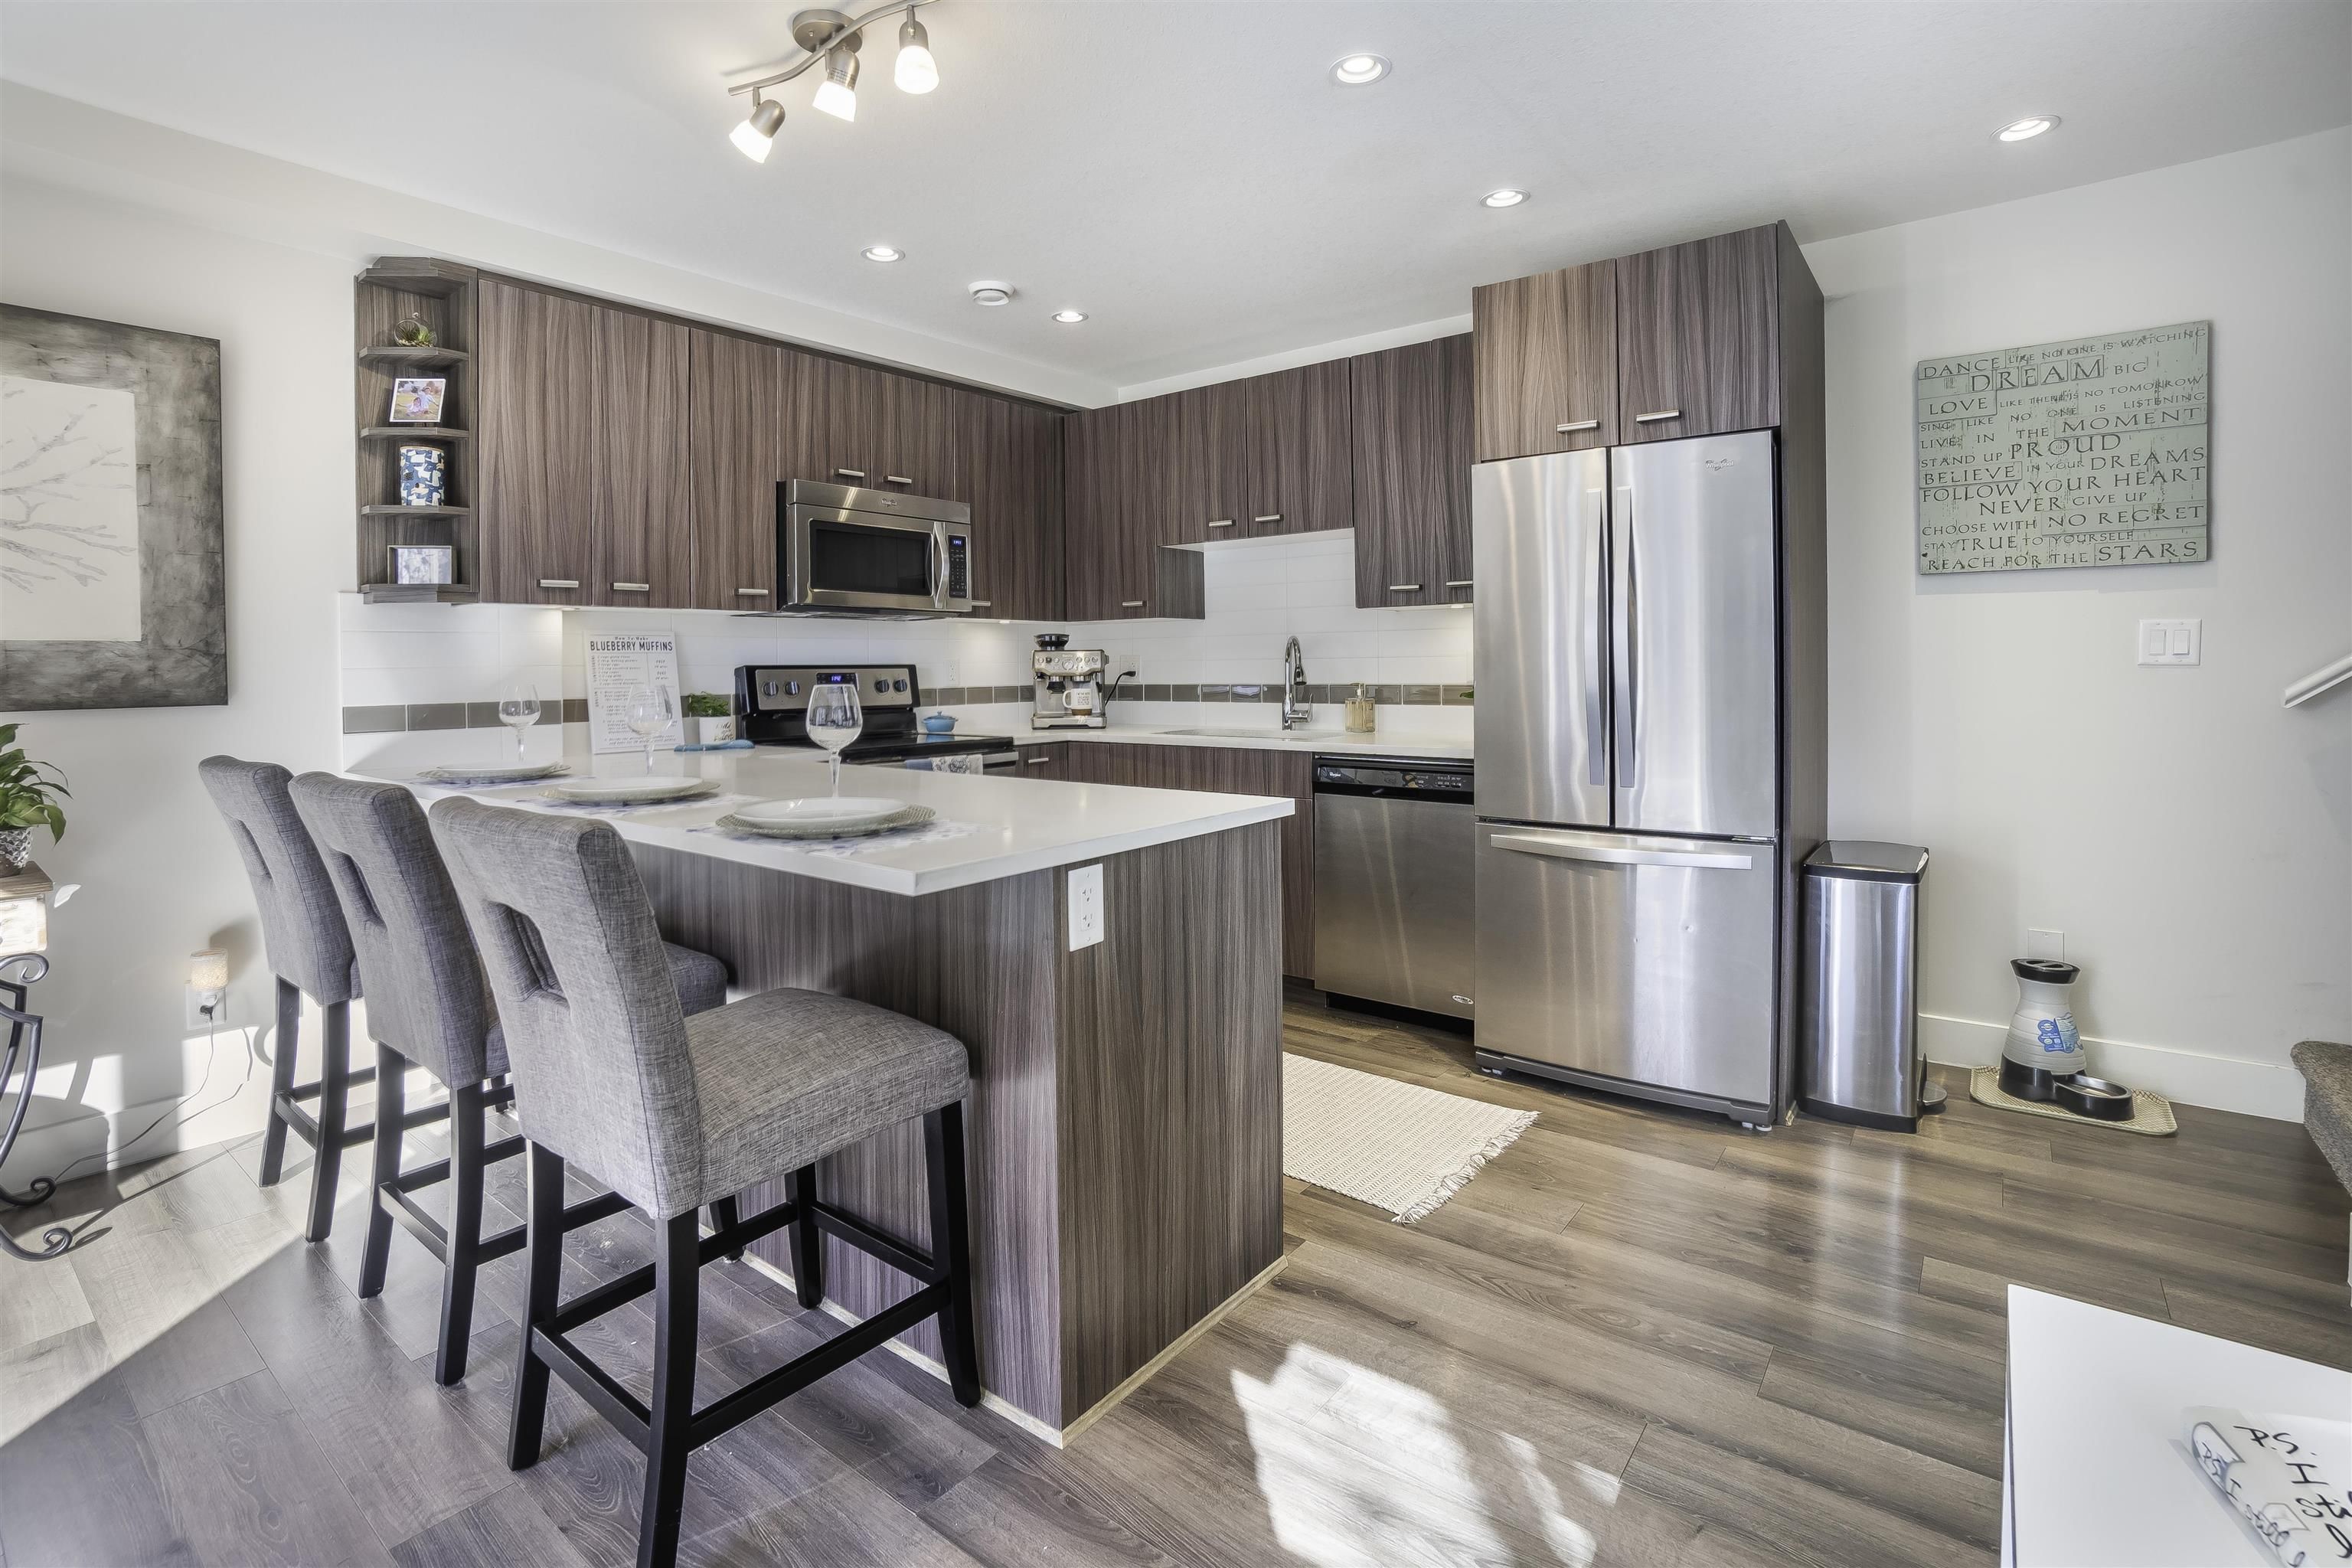 Oversized windows make this kitchen bright and enjoyable to be in! Stainless Steel Appliances, lots of cupboards and a great island for enjoying visiting with your guests while you cook!